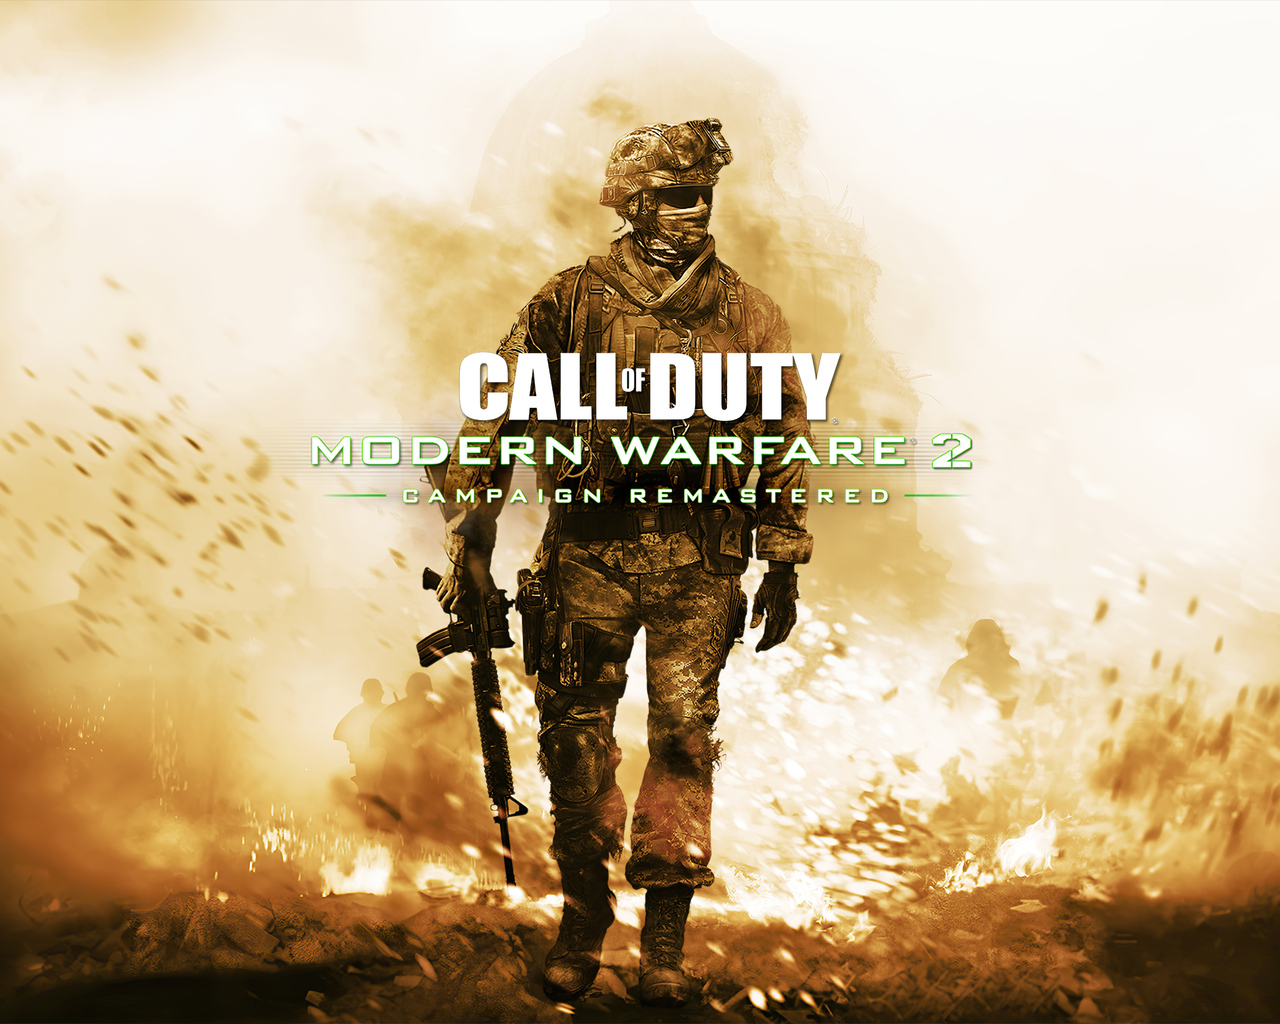 1280x1024 Call Of Duty Modern Warfare 2 Campaign Remastered 4k 1280x1024  Resolution HD 4k Wallpapers, Images, Backgrounds, Photos and Pictures